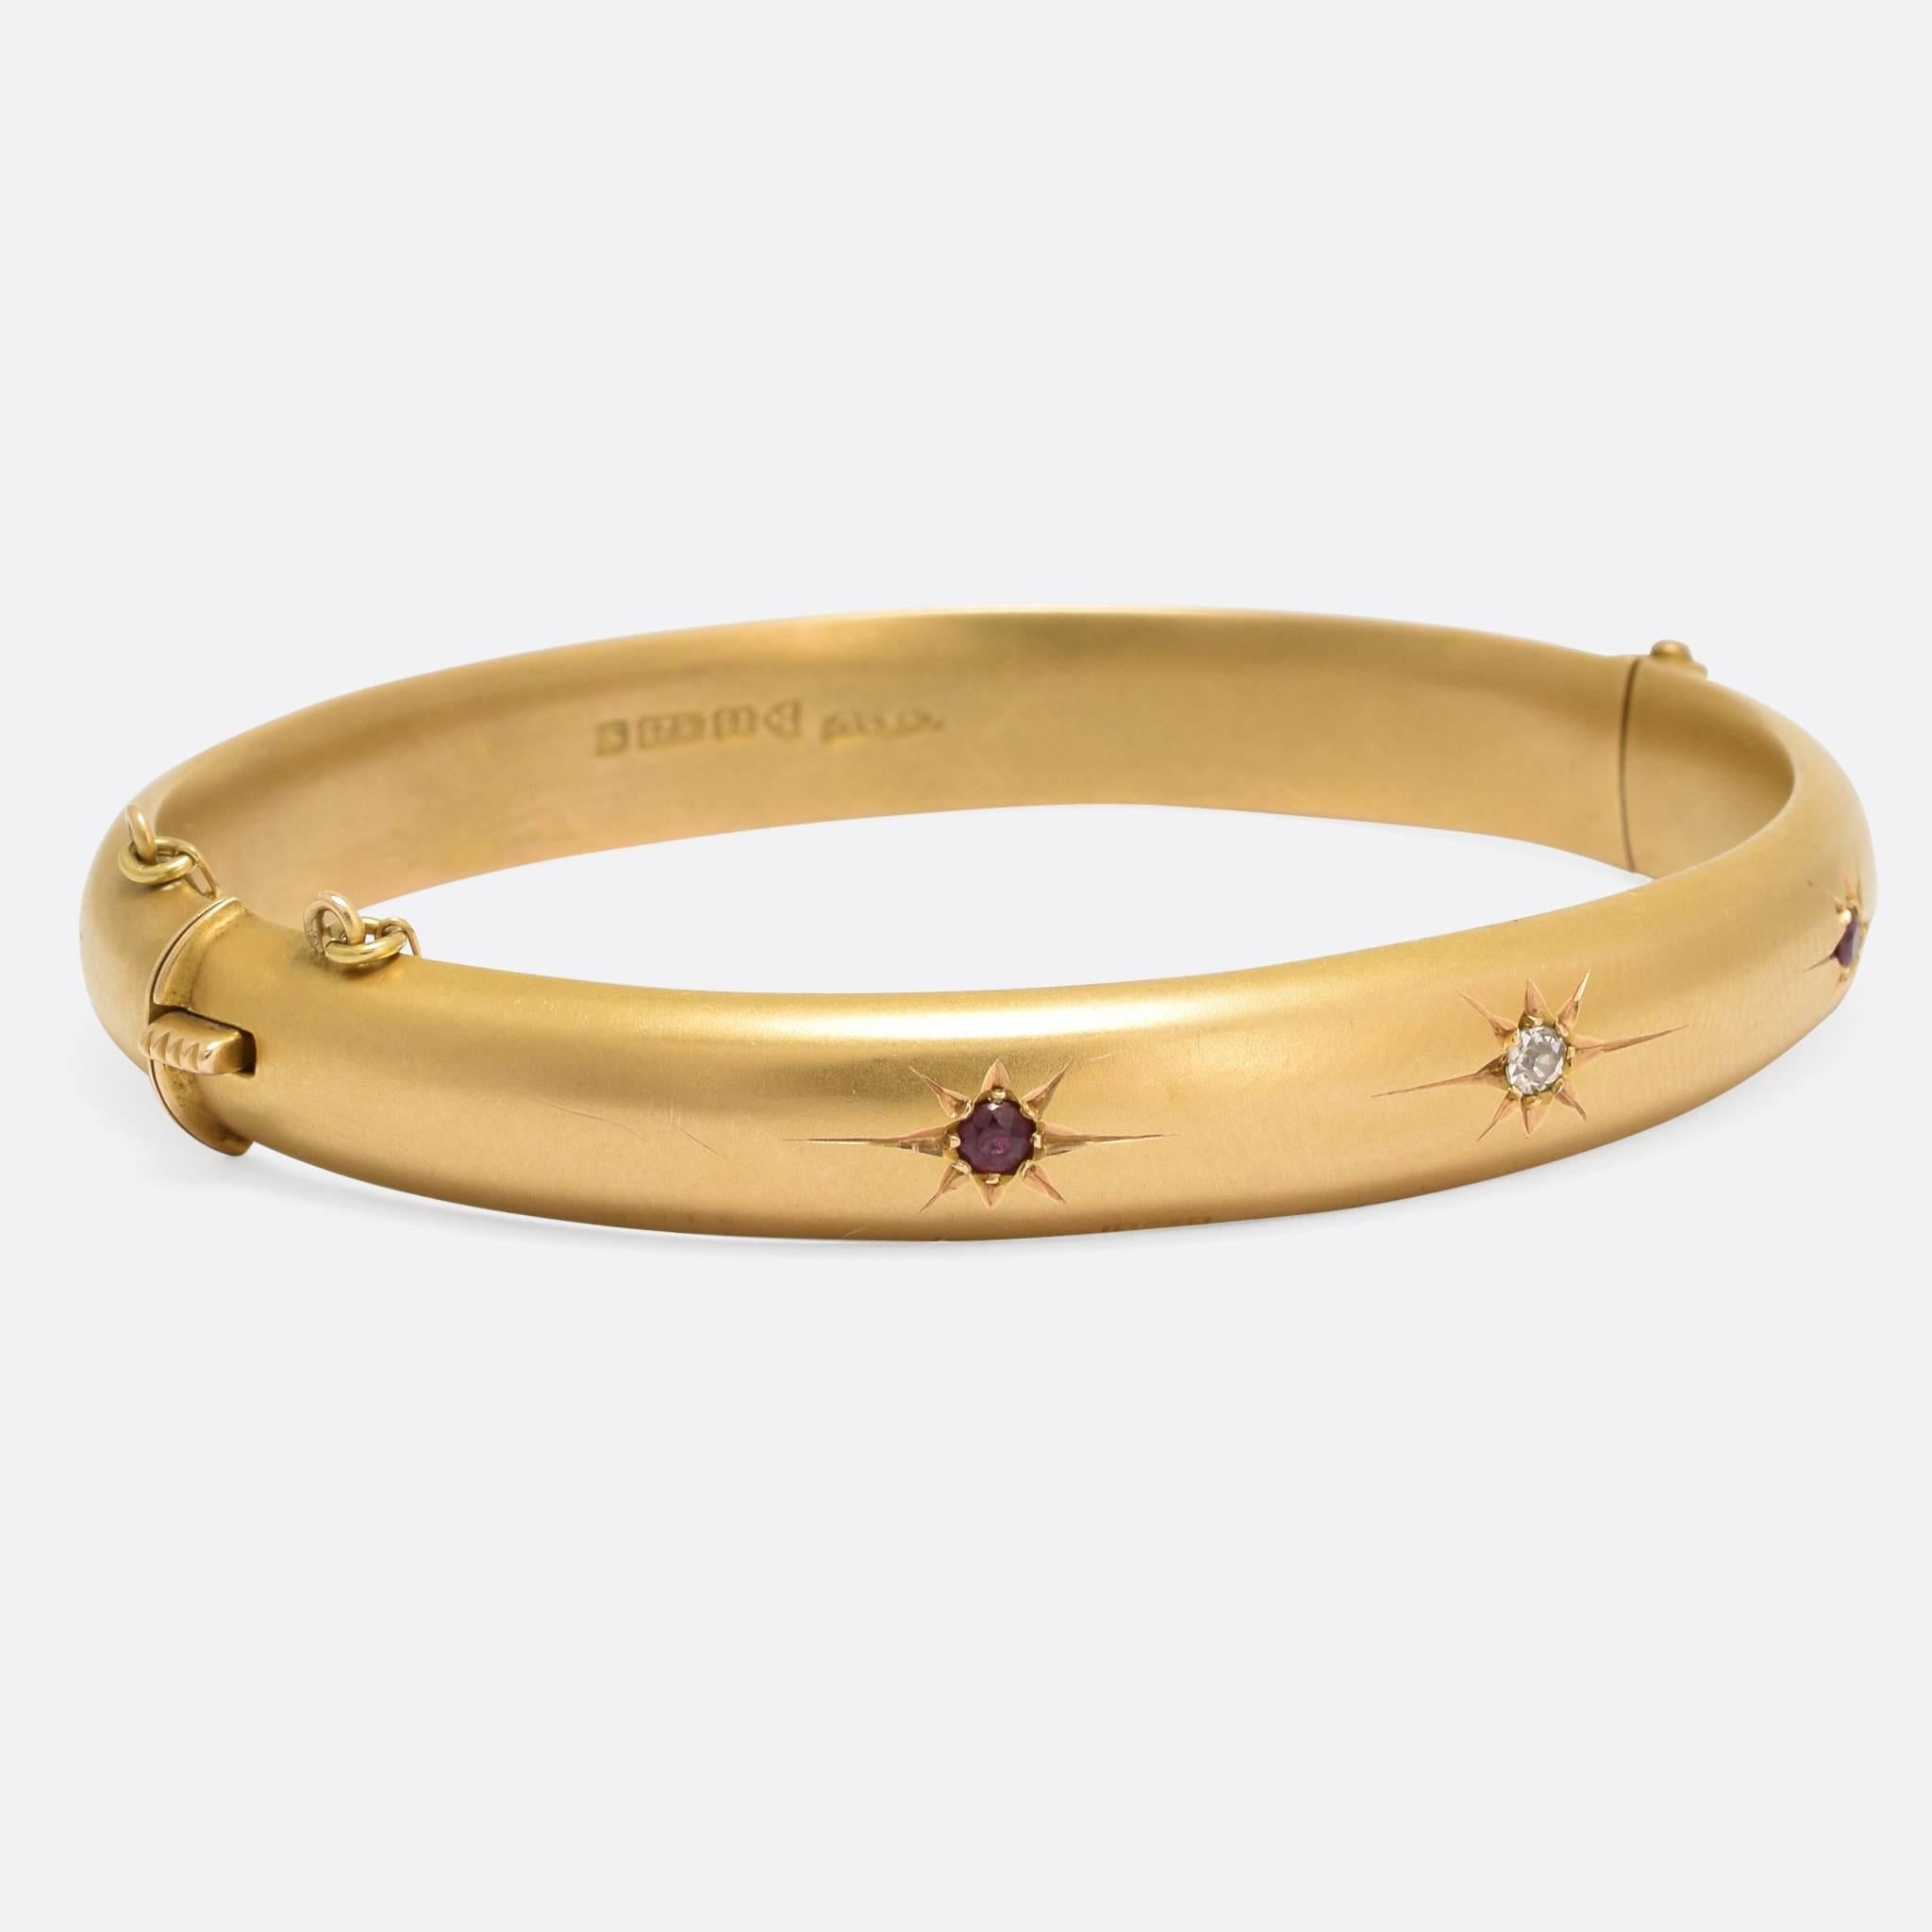 A stylish, but minimalist, antique bangle modelled in brushed 15k gold and set with two rubies and an old cut diamond. The piece is fully hallmarked, with the Chester date mark for 1907, and the gold has a lovely matte finish - the stones rest in